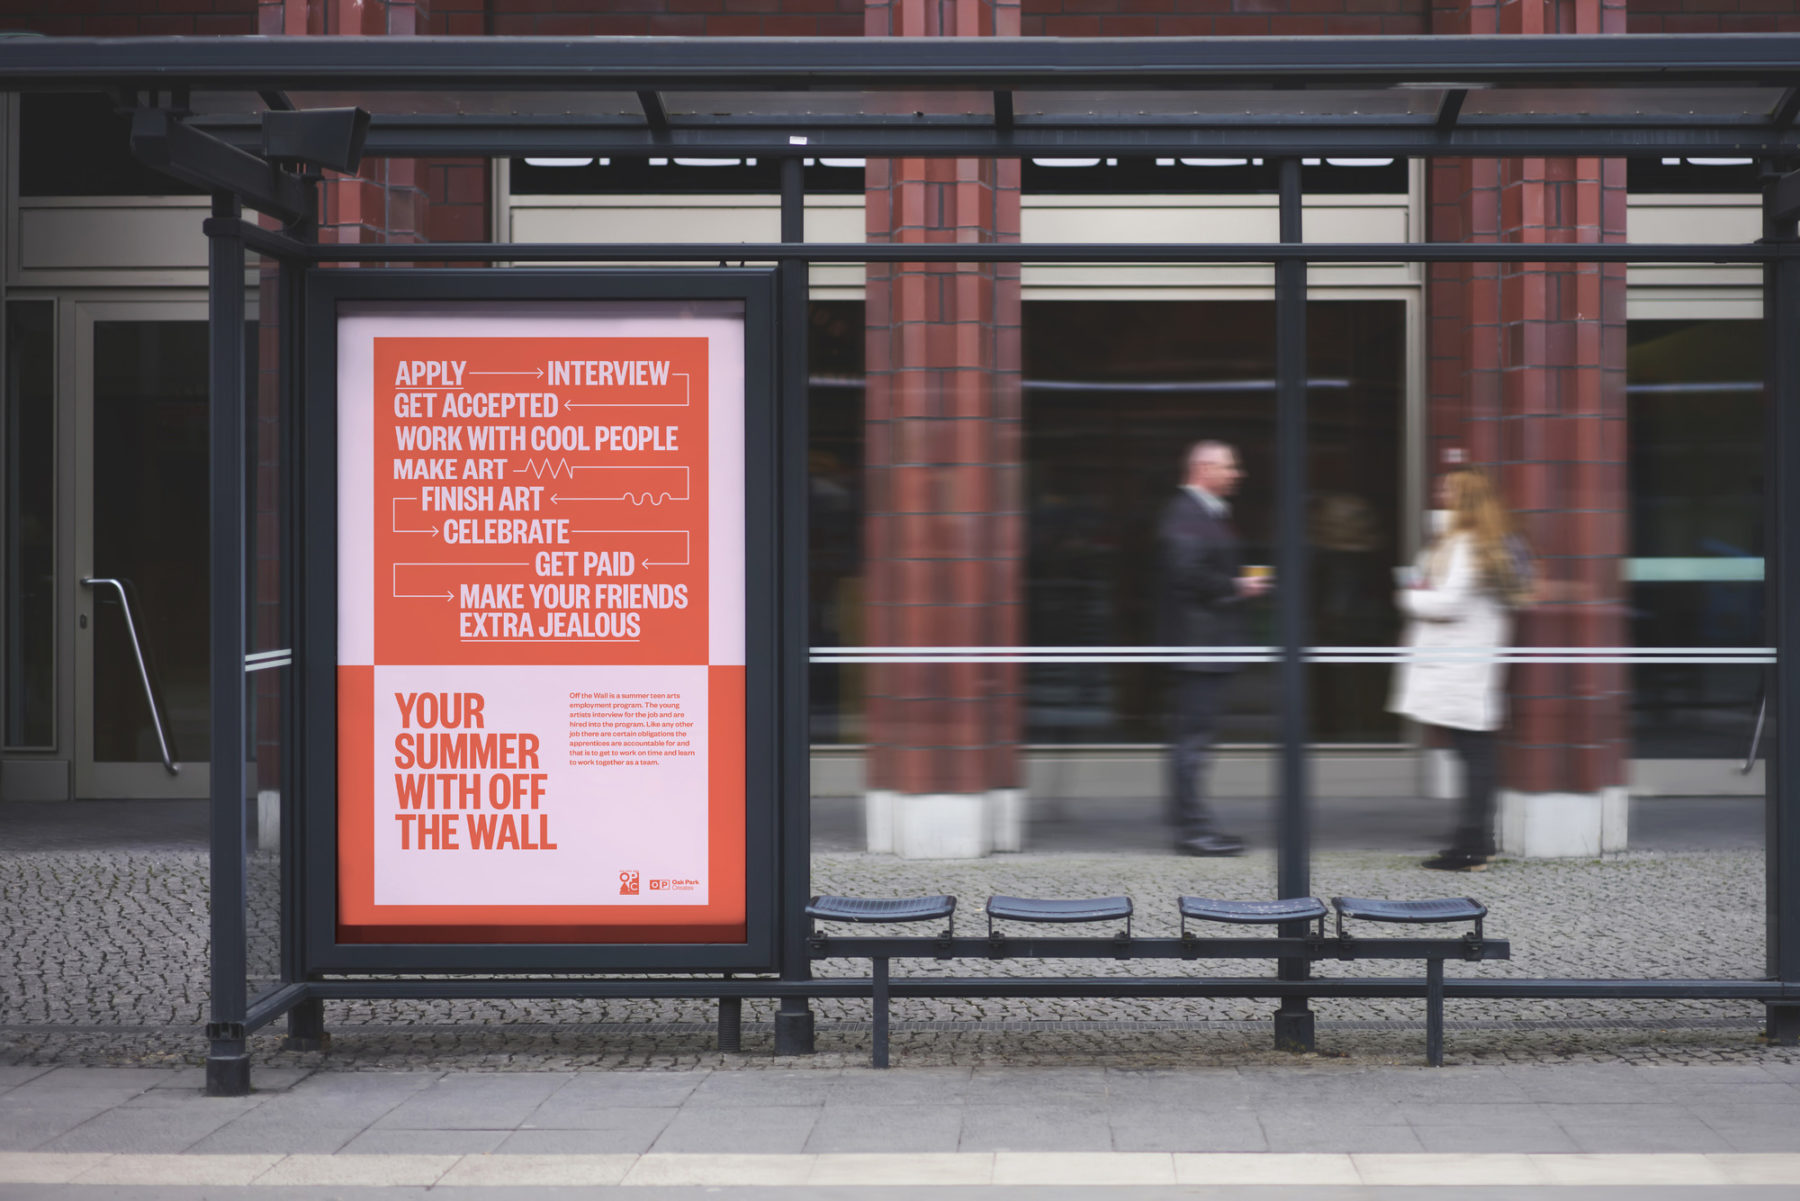 Branded poster is shown within a bus stop shelter